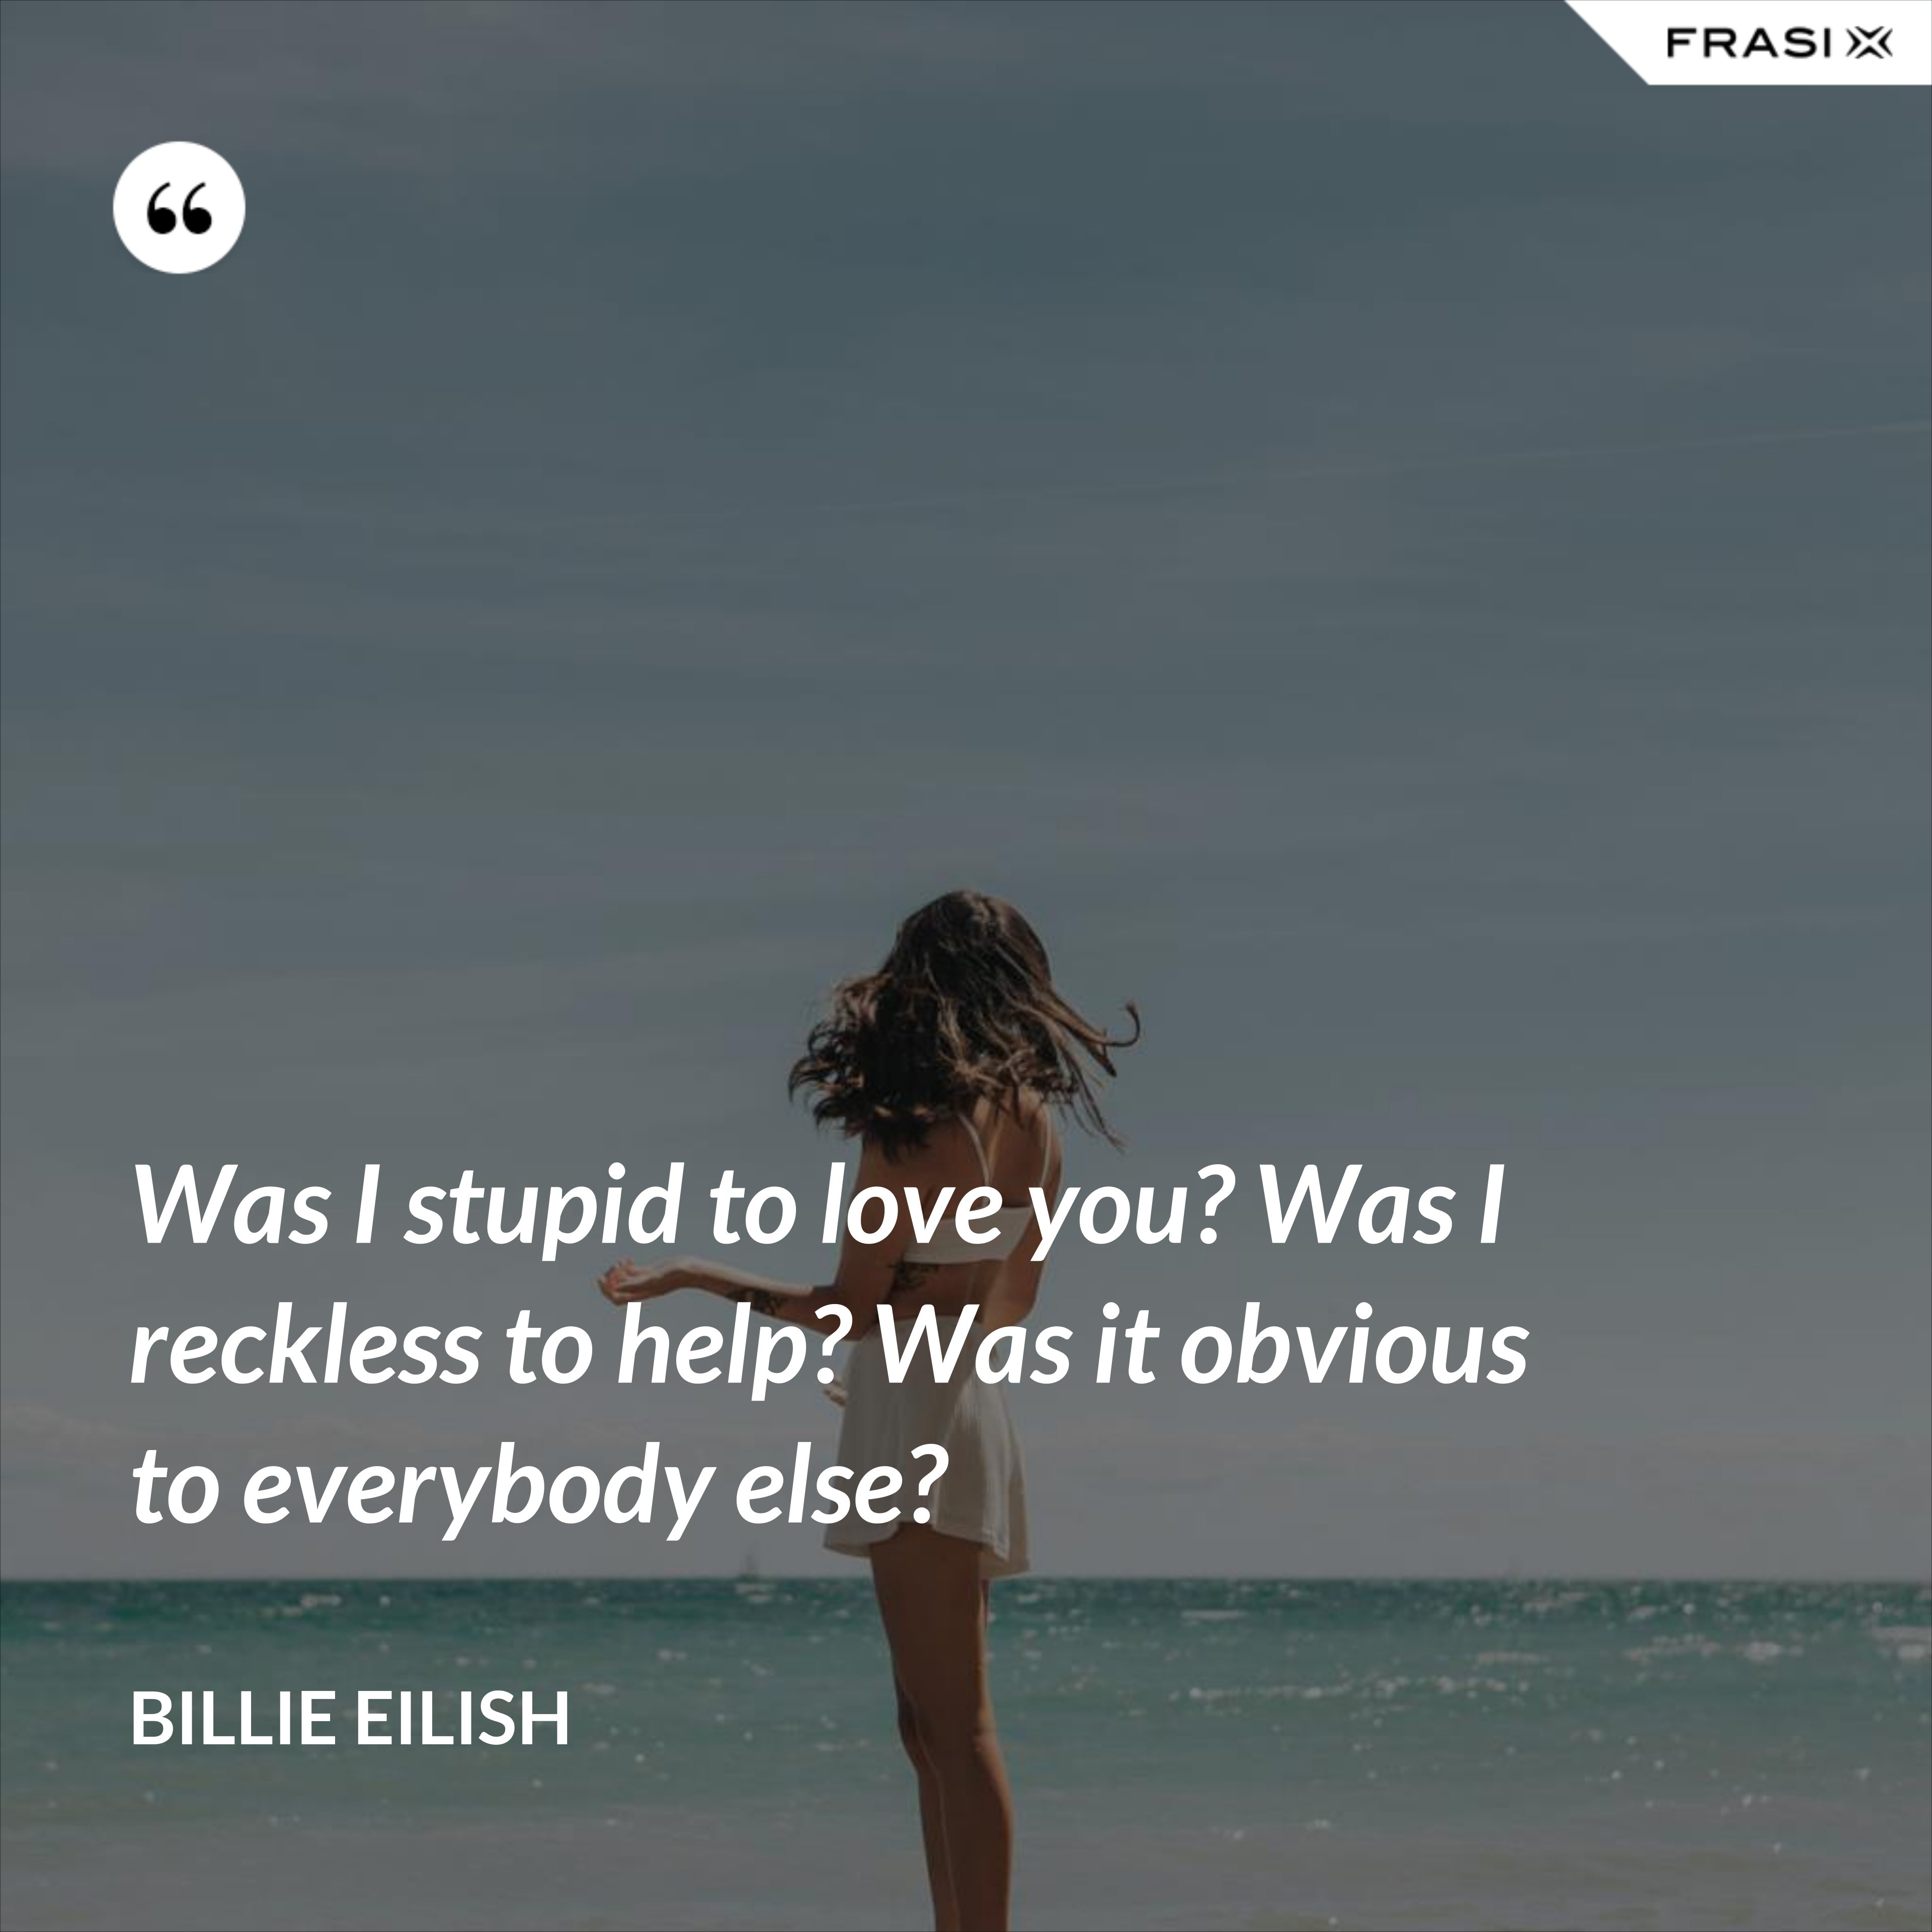 Was I stupid to love you? Was I reckless to help? Was it obvious to everybody else? - Billie Eilish